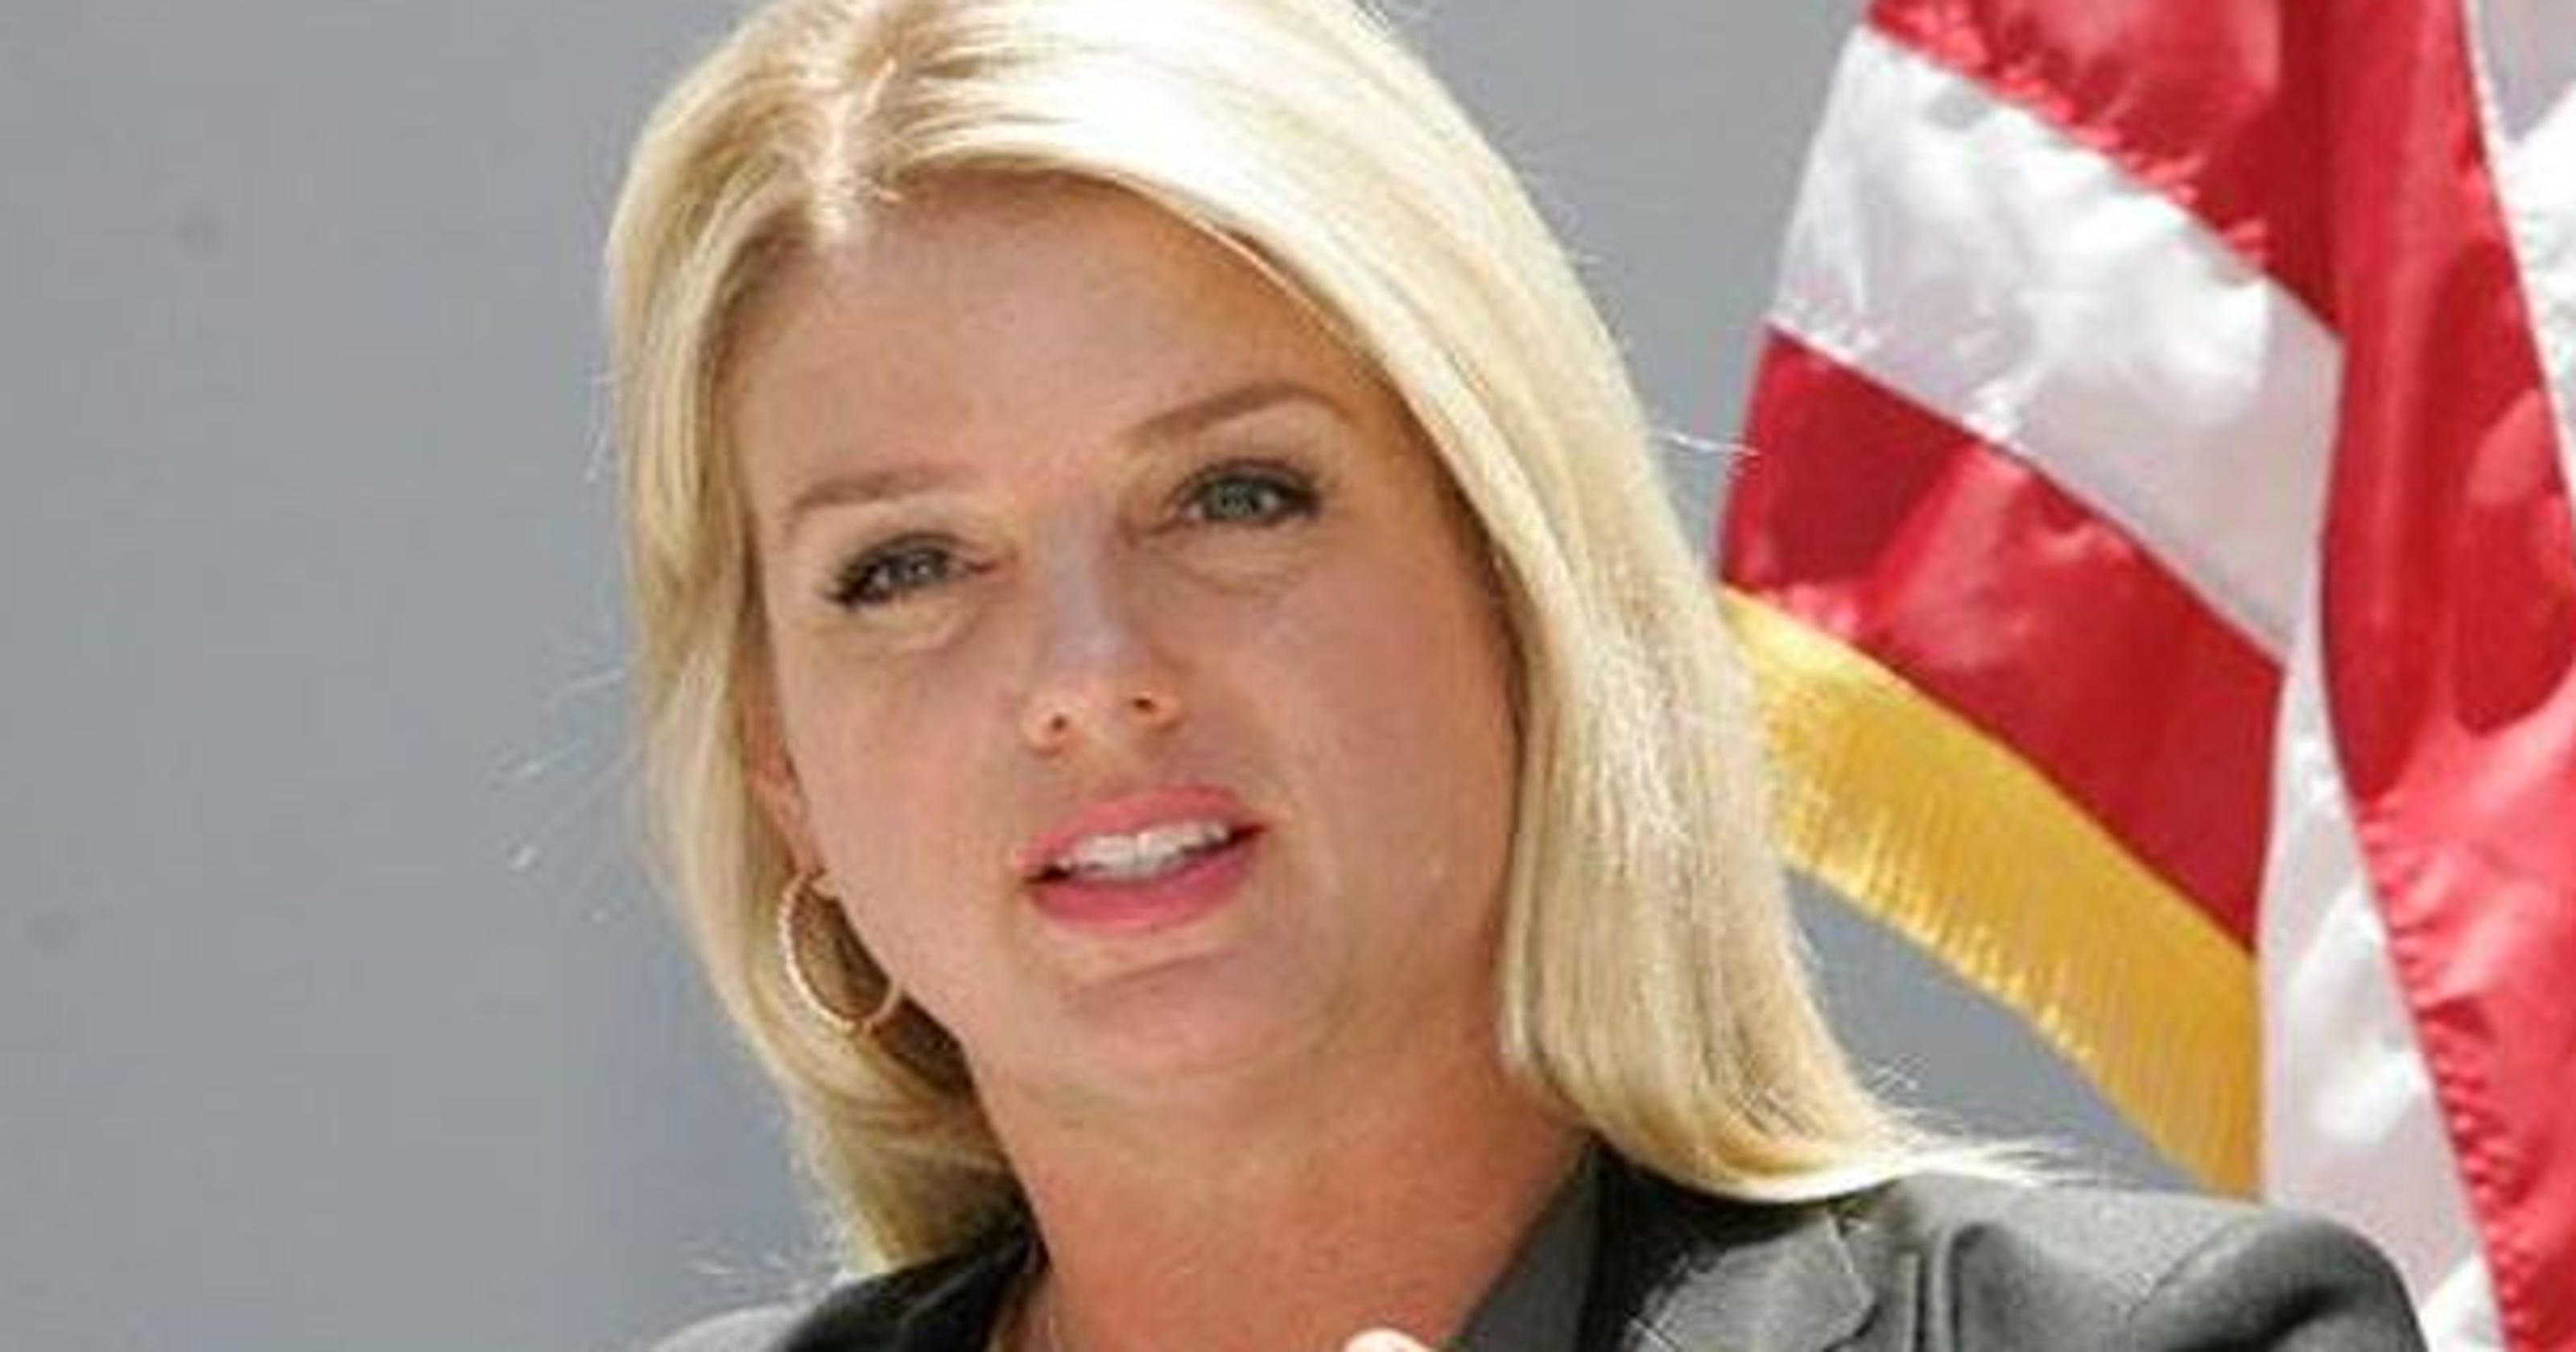 Pam Bondi re-elected as Florida attorney general3200 x 1680